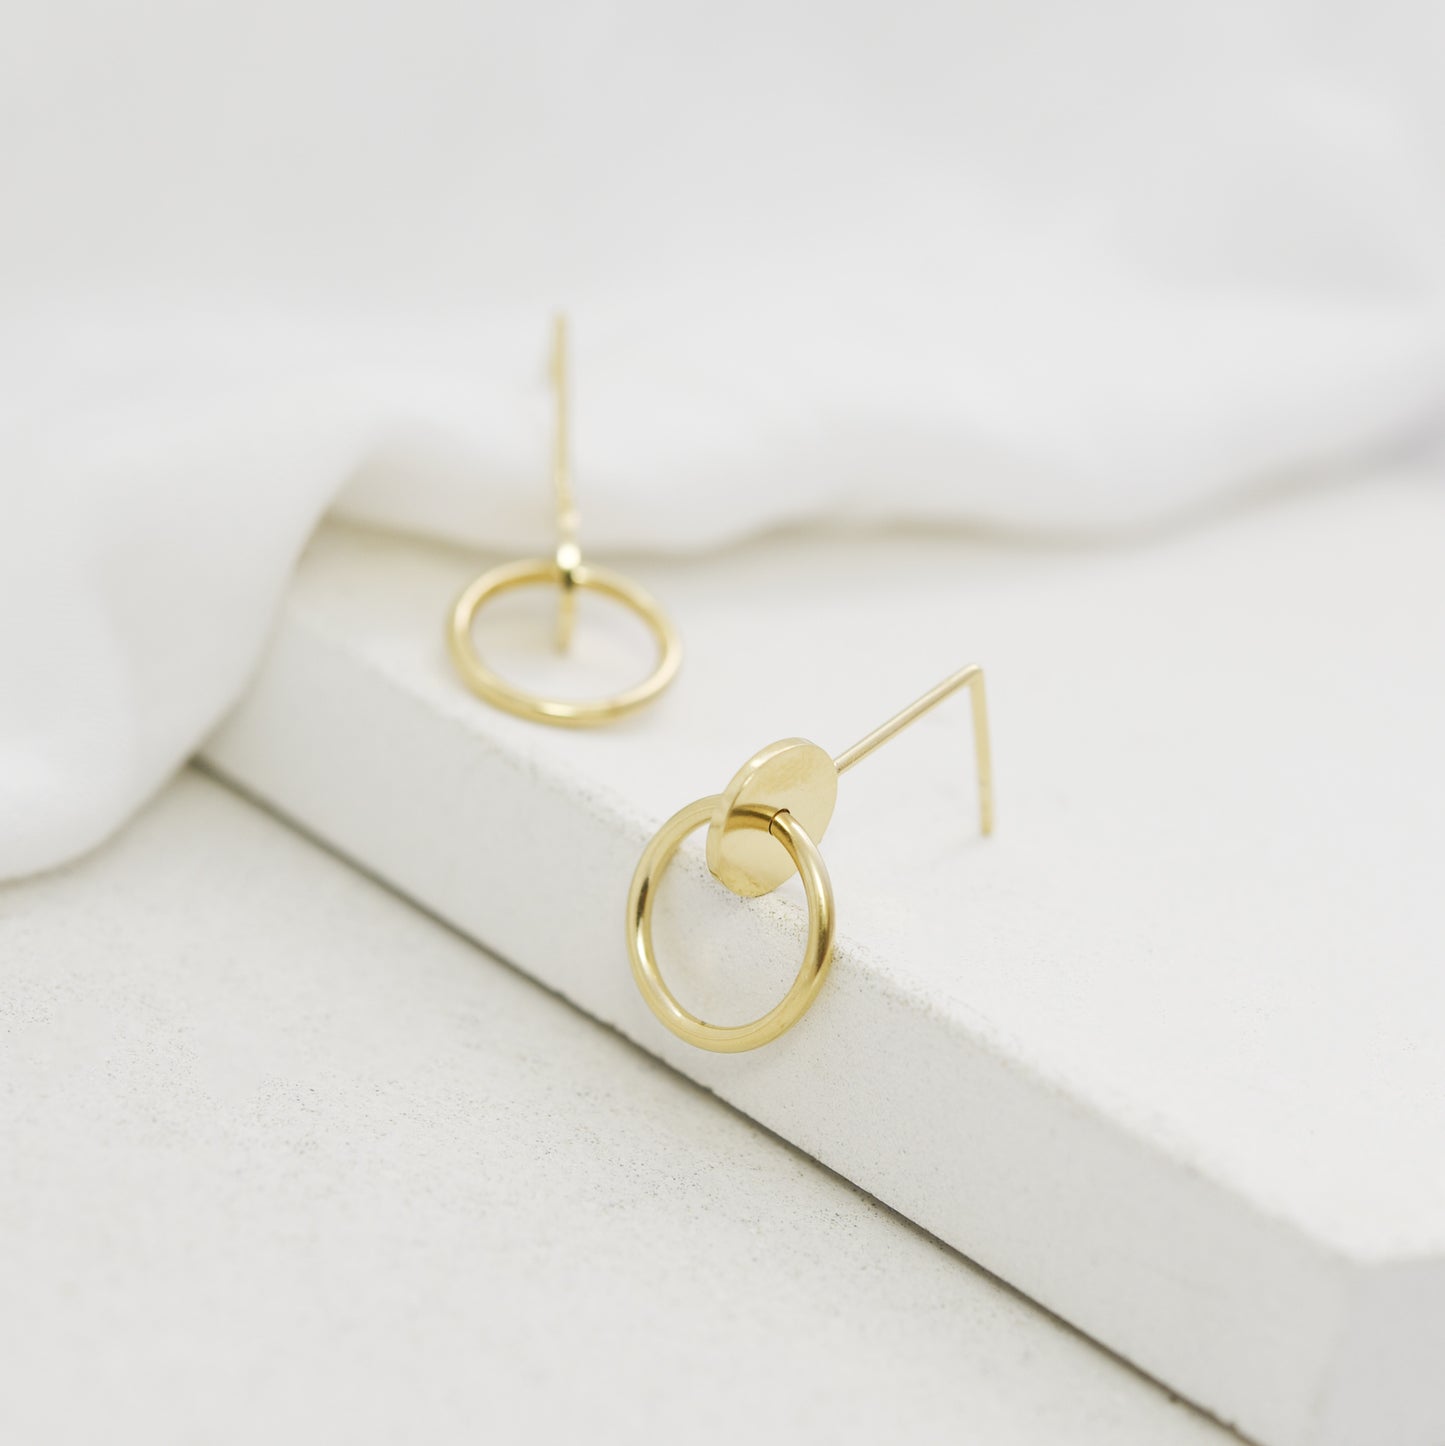 Interlocking circles gold earrings handcrafted by AgJc